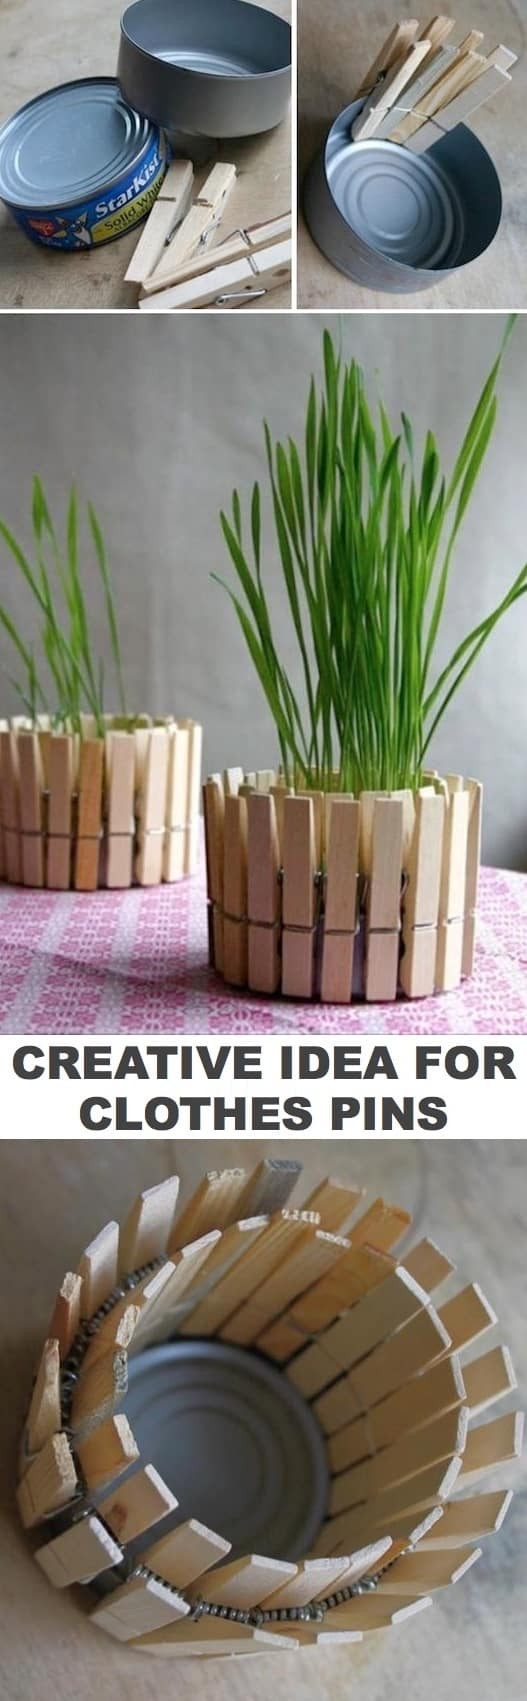 Easy Craft Ideas For Adults
 10 Creative Craft Ideas For Adults Abundator